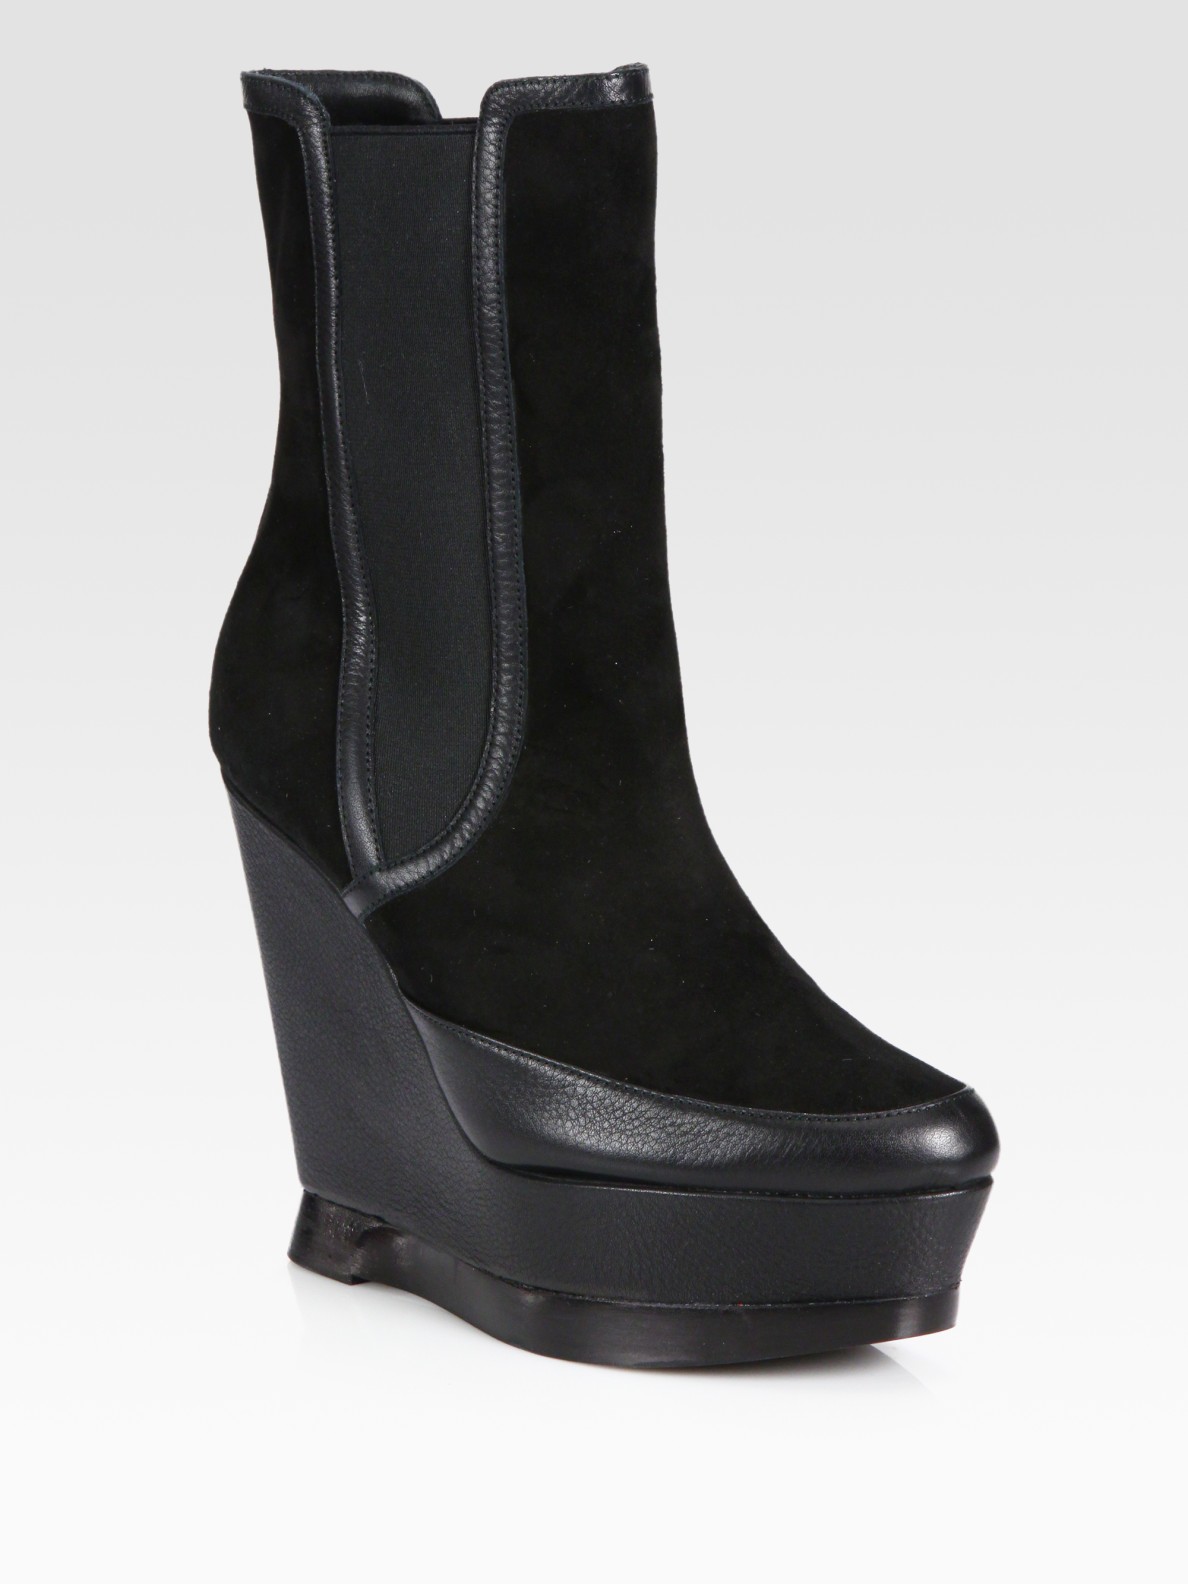 Edmundo Castillo Suede and Leather Wedge Ankle Boots in Black | Lyst